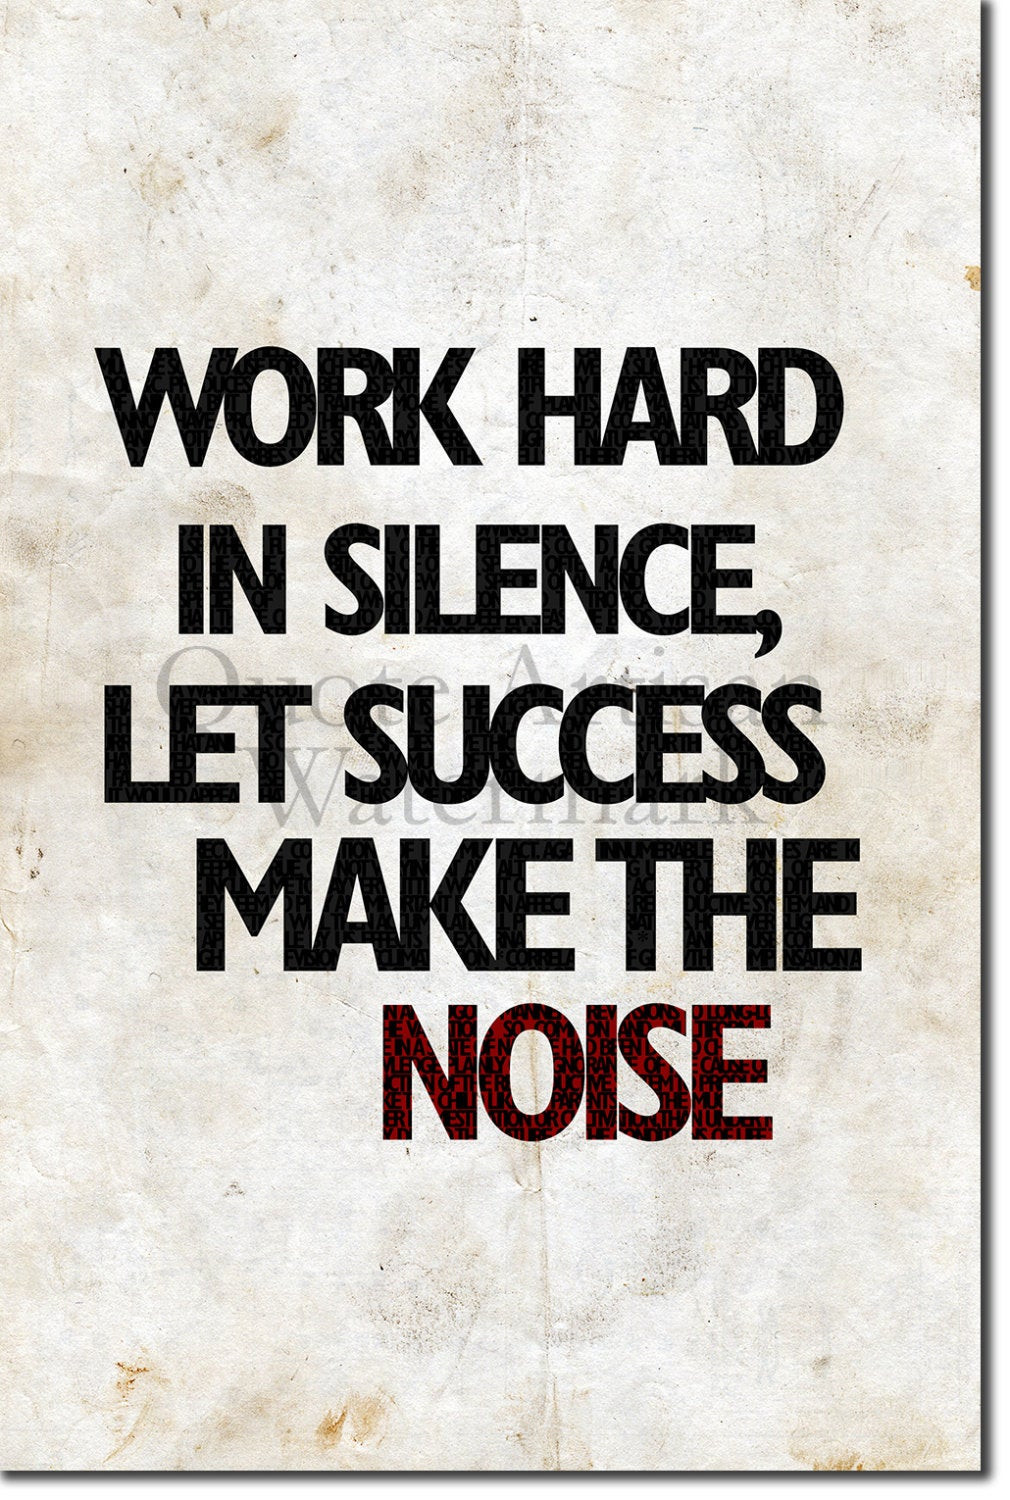 Motivational Quotes For Hard Workers
 Motivational Quote Poster Work hard in silence let